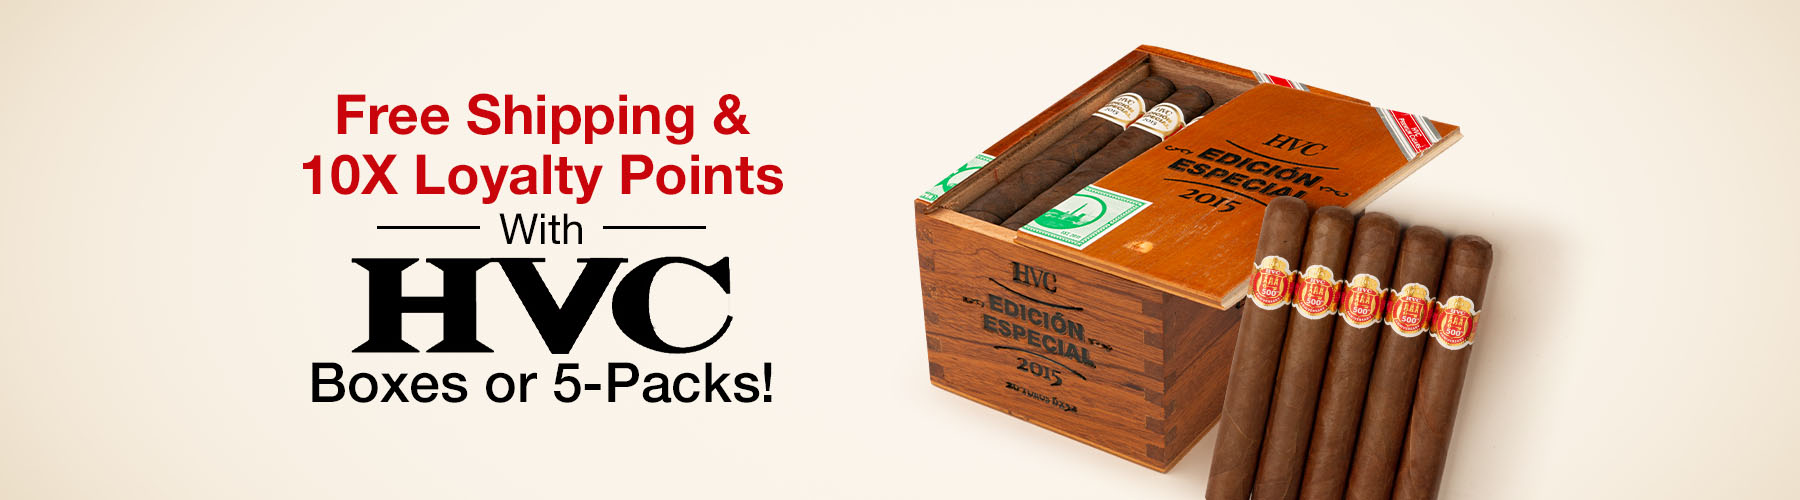 'Free Shipping & 10X Loyalty Points with HVC boxes & 5-Packs!